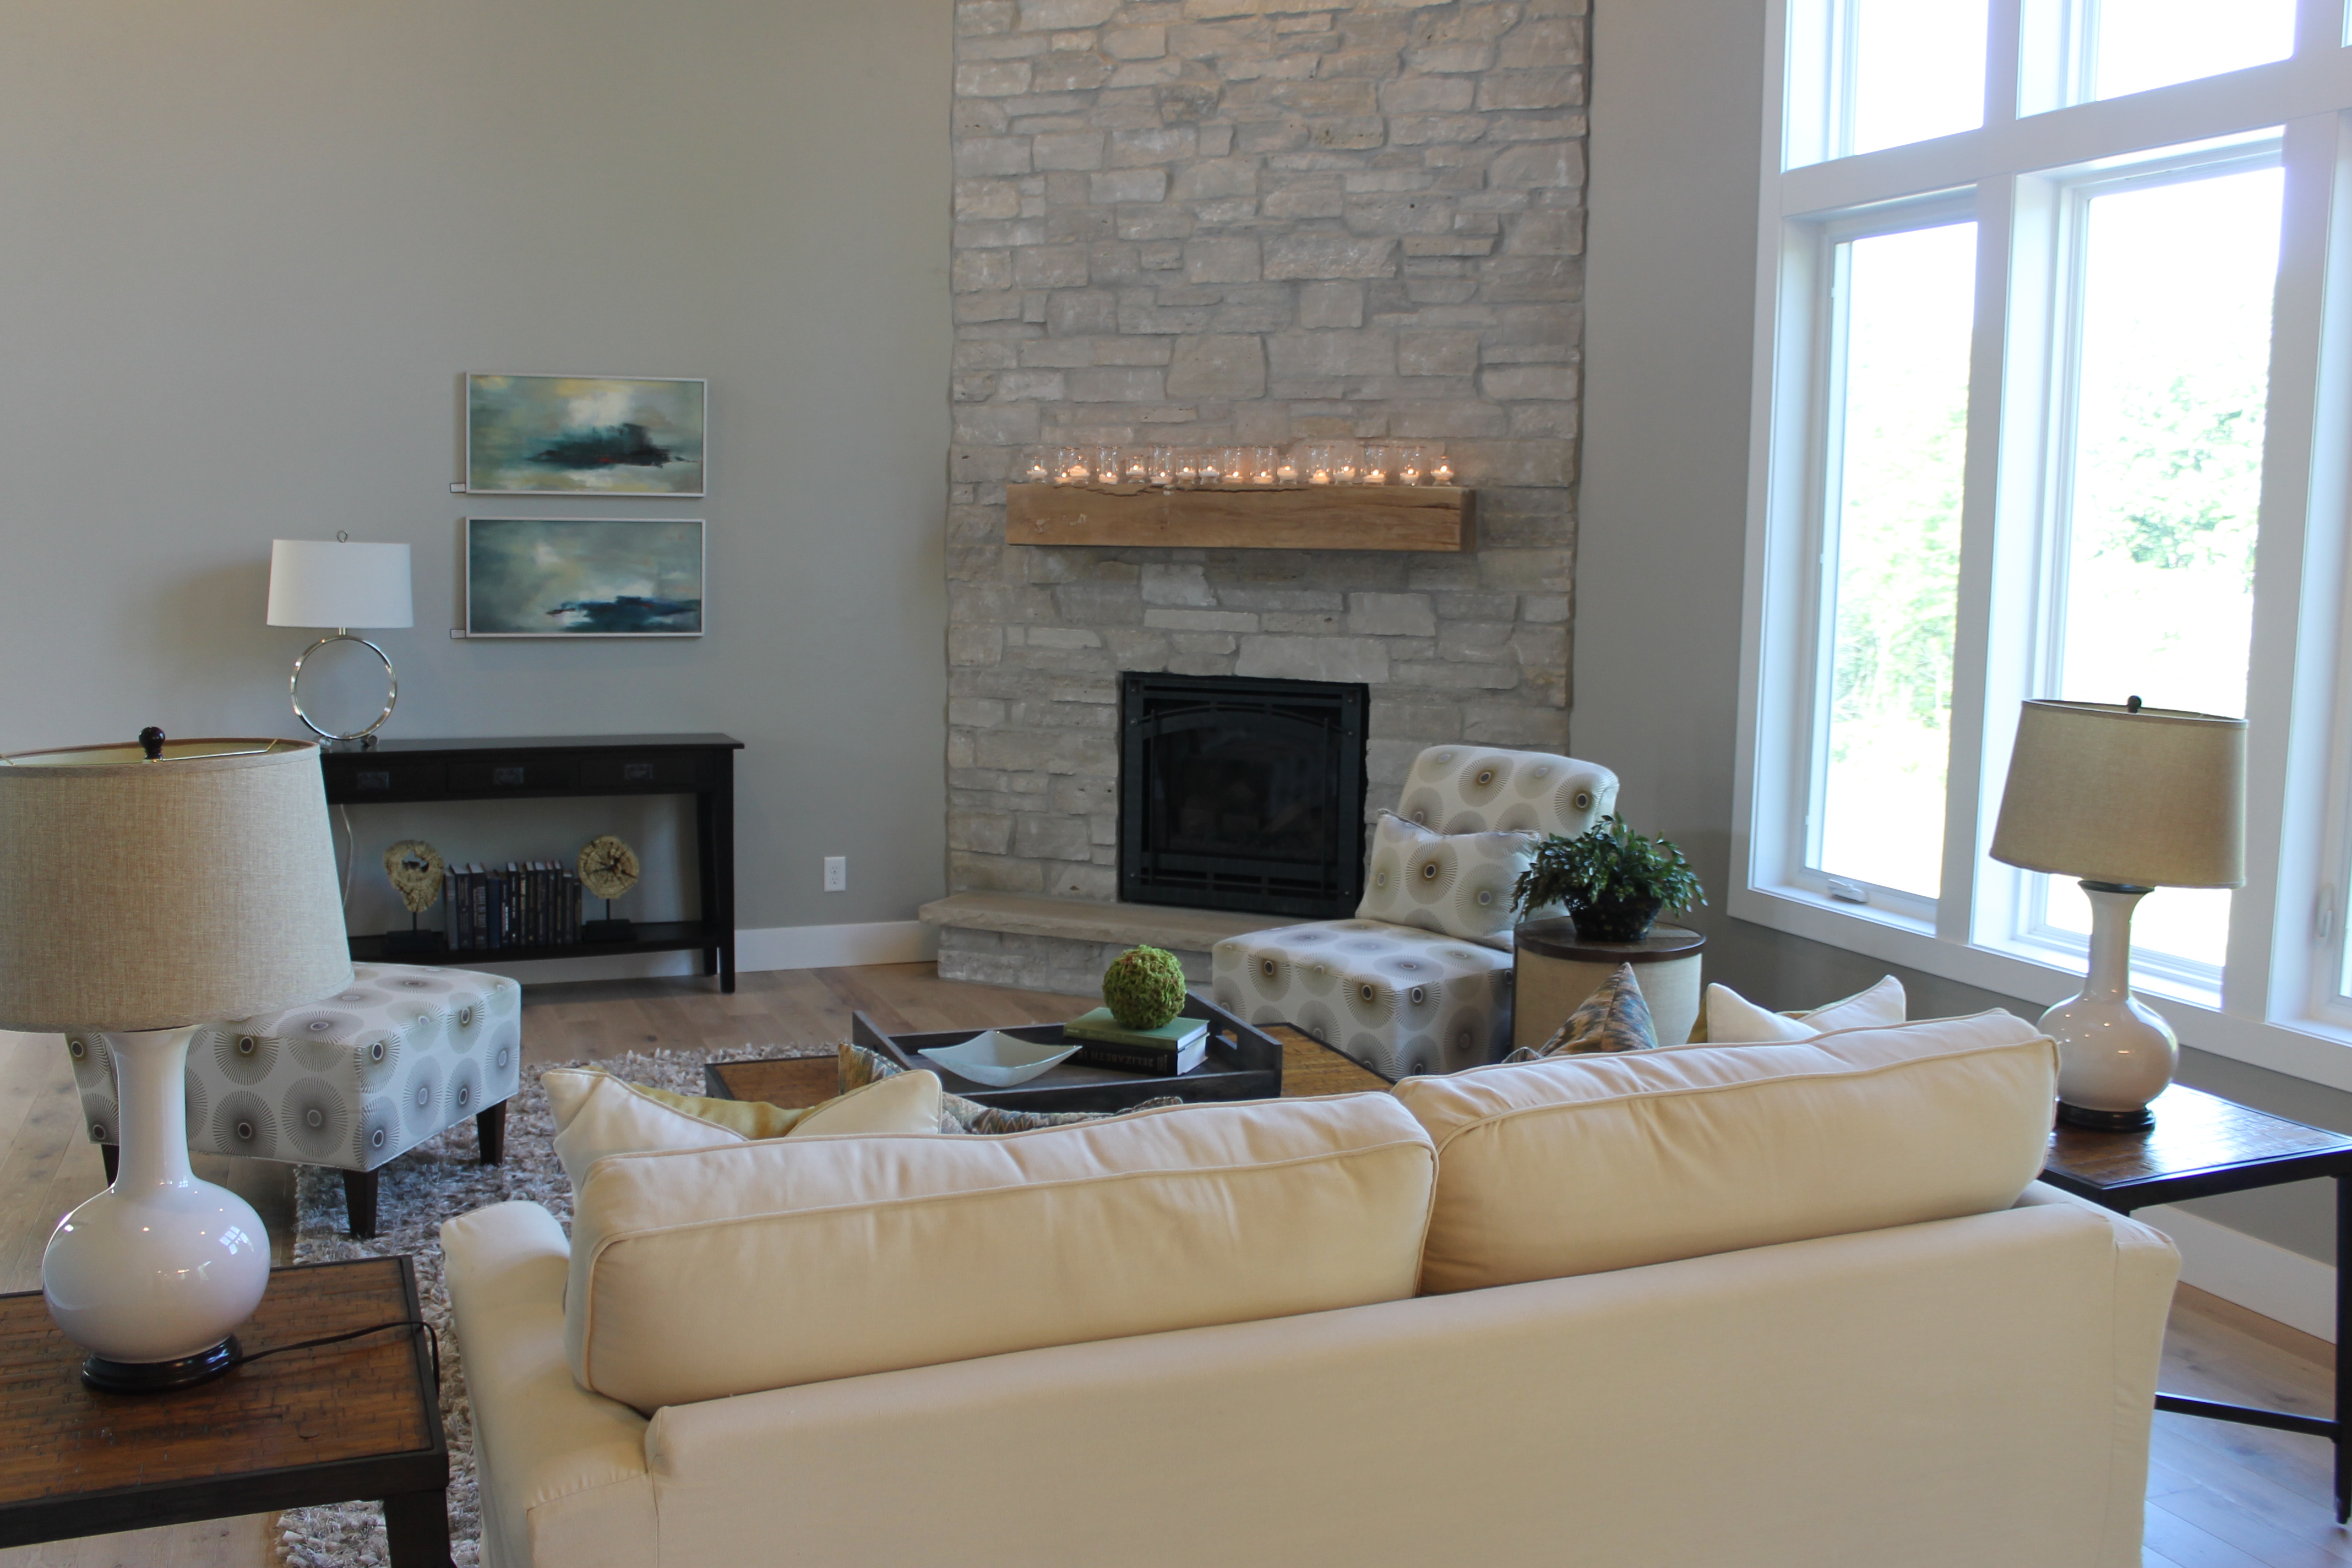 Fireplace Designs And The Rustic Mantel Trend Katie Jane Interiors